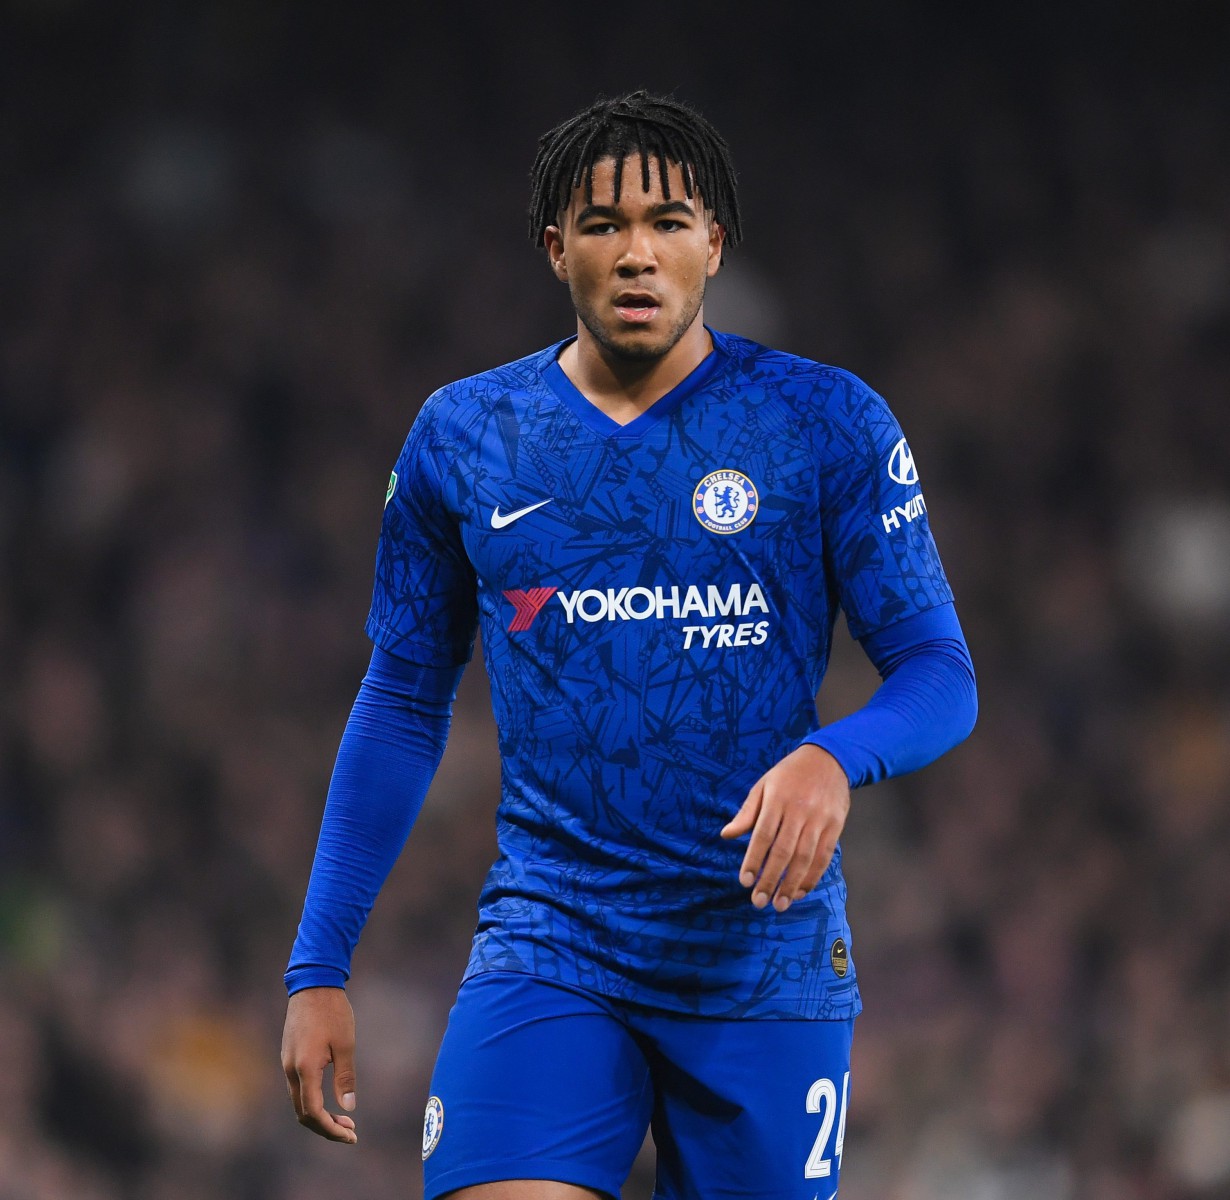 , Chelsea must copy Man City and Liverpools tactics by using bombing full-backs like Reece James and Emerson